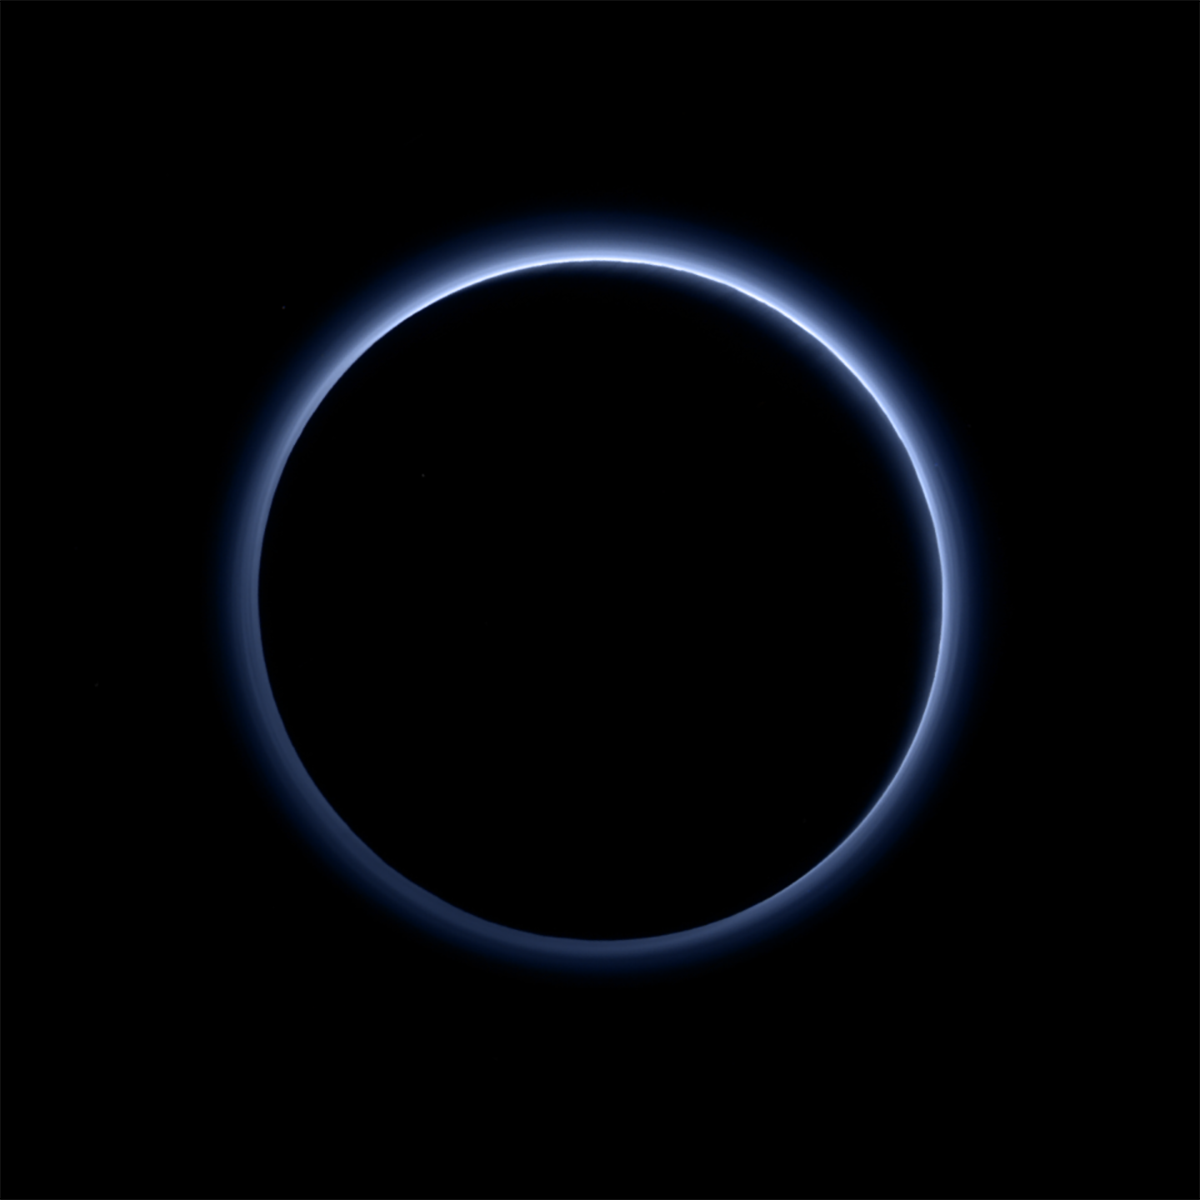 What Do We Know About the Atmosphere of Pluto?